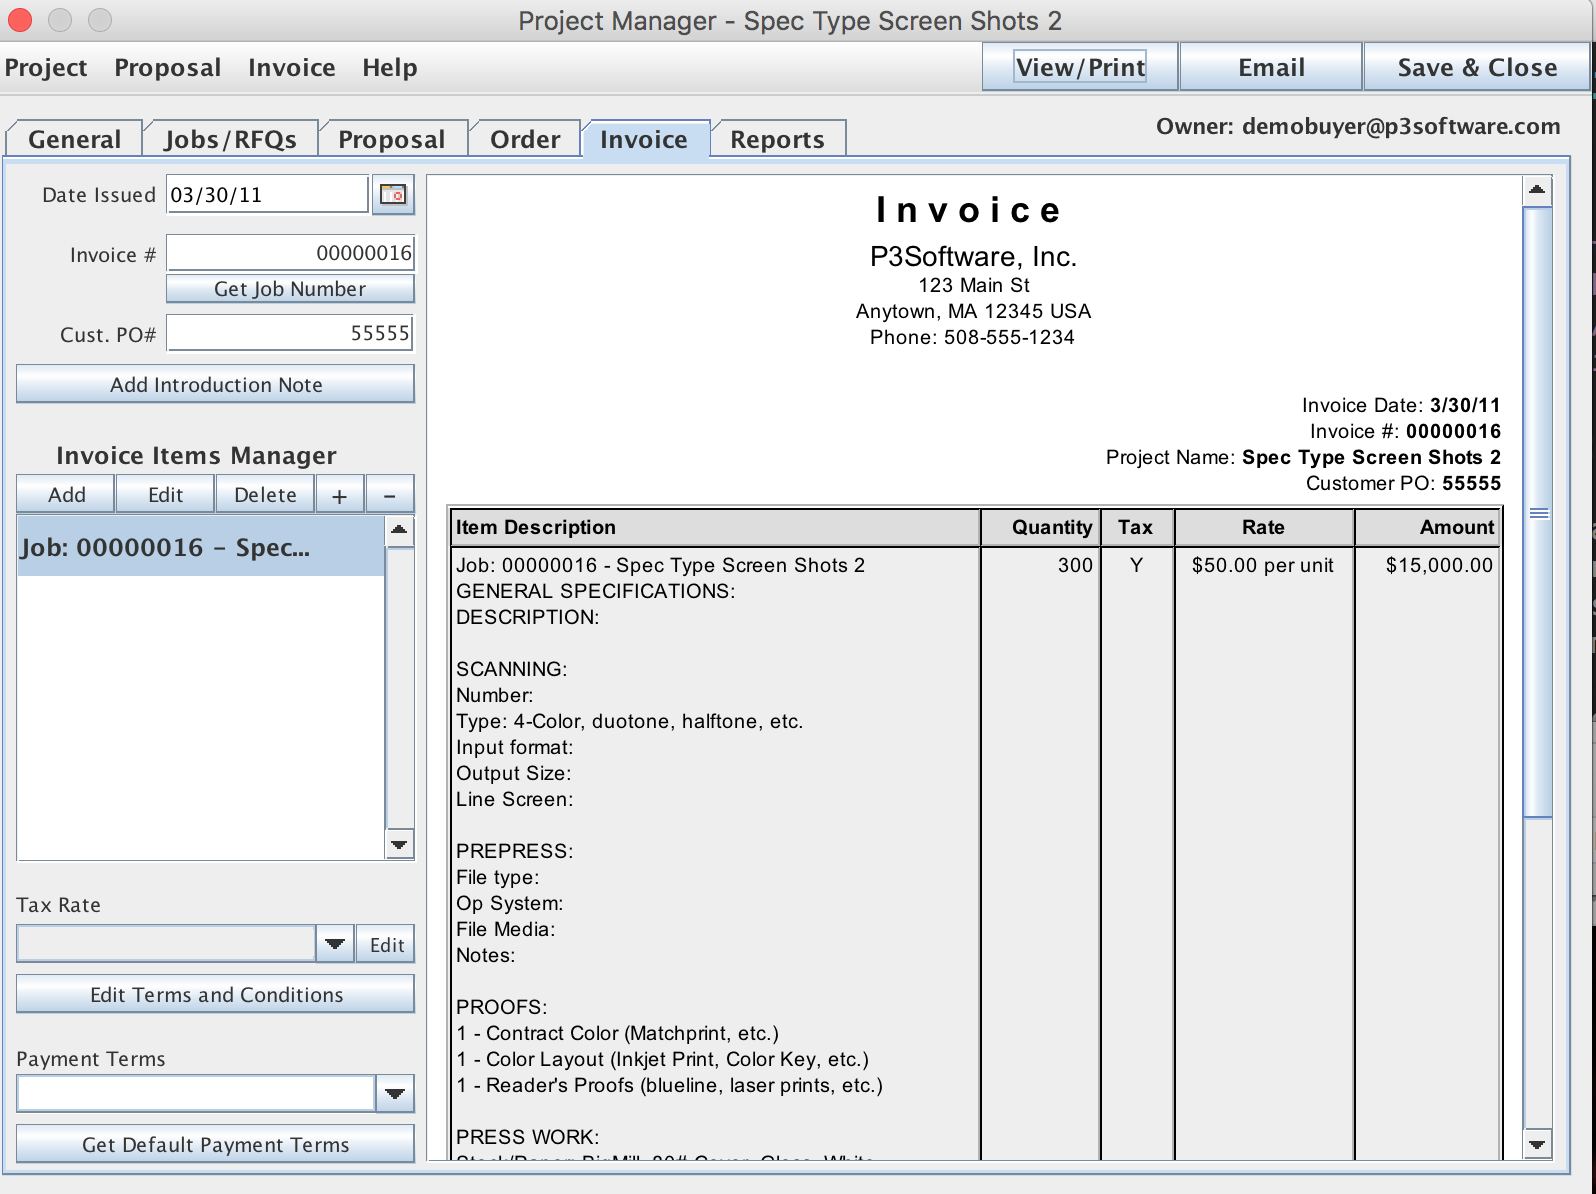 Invoice tab pane shown from the Job List panel / Job Master window / Proposal menu / Project Manager window